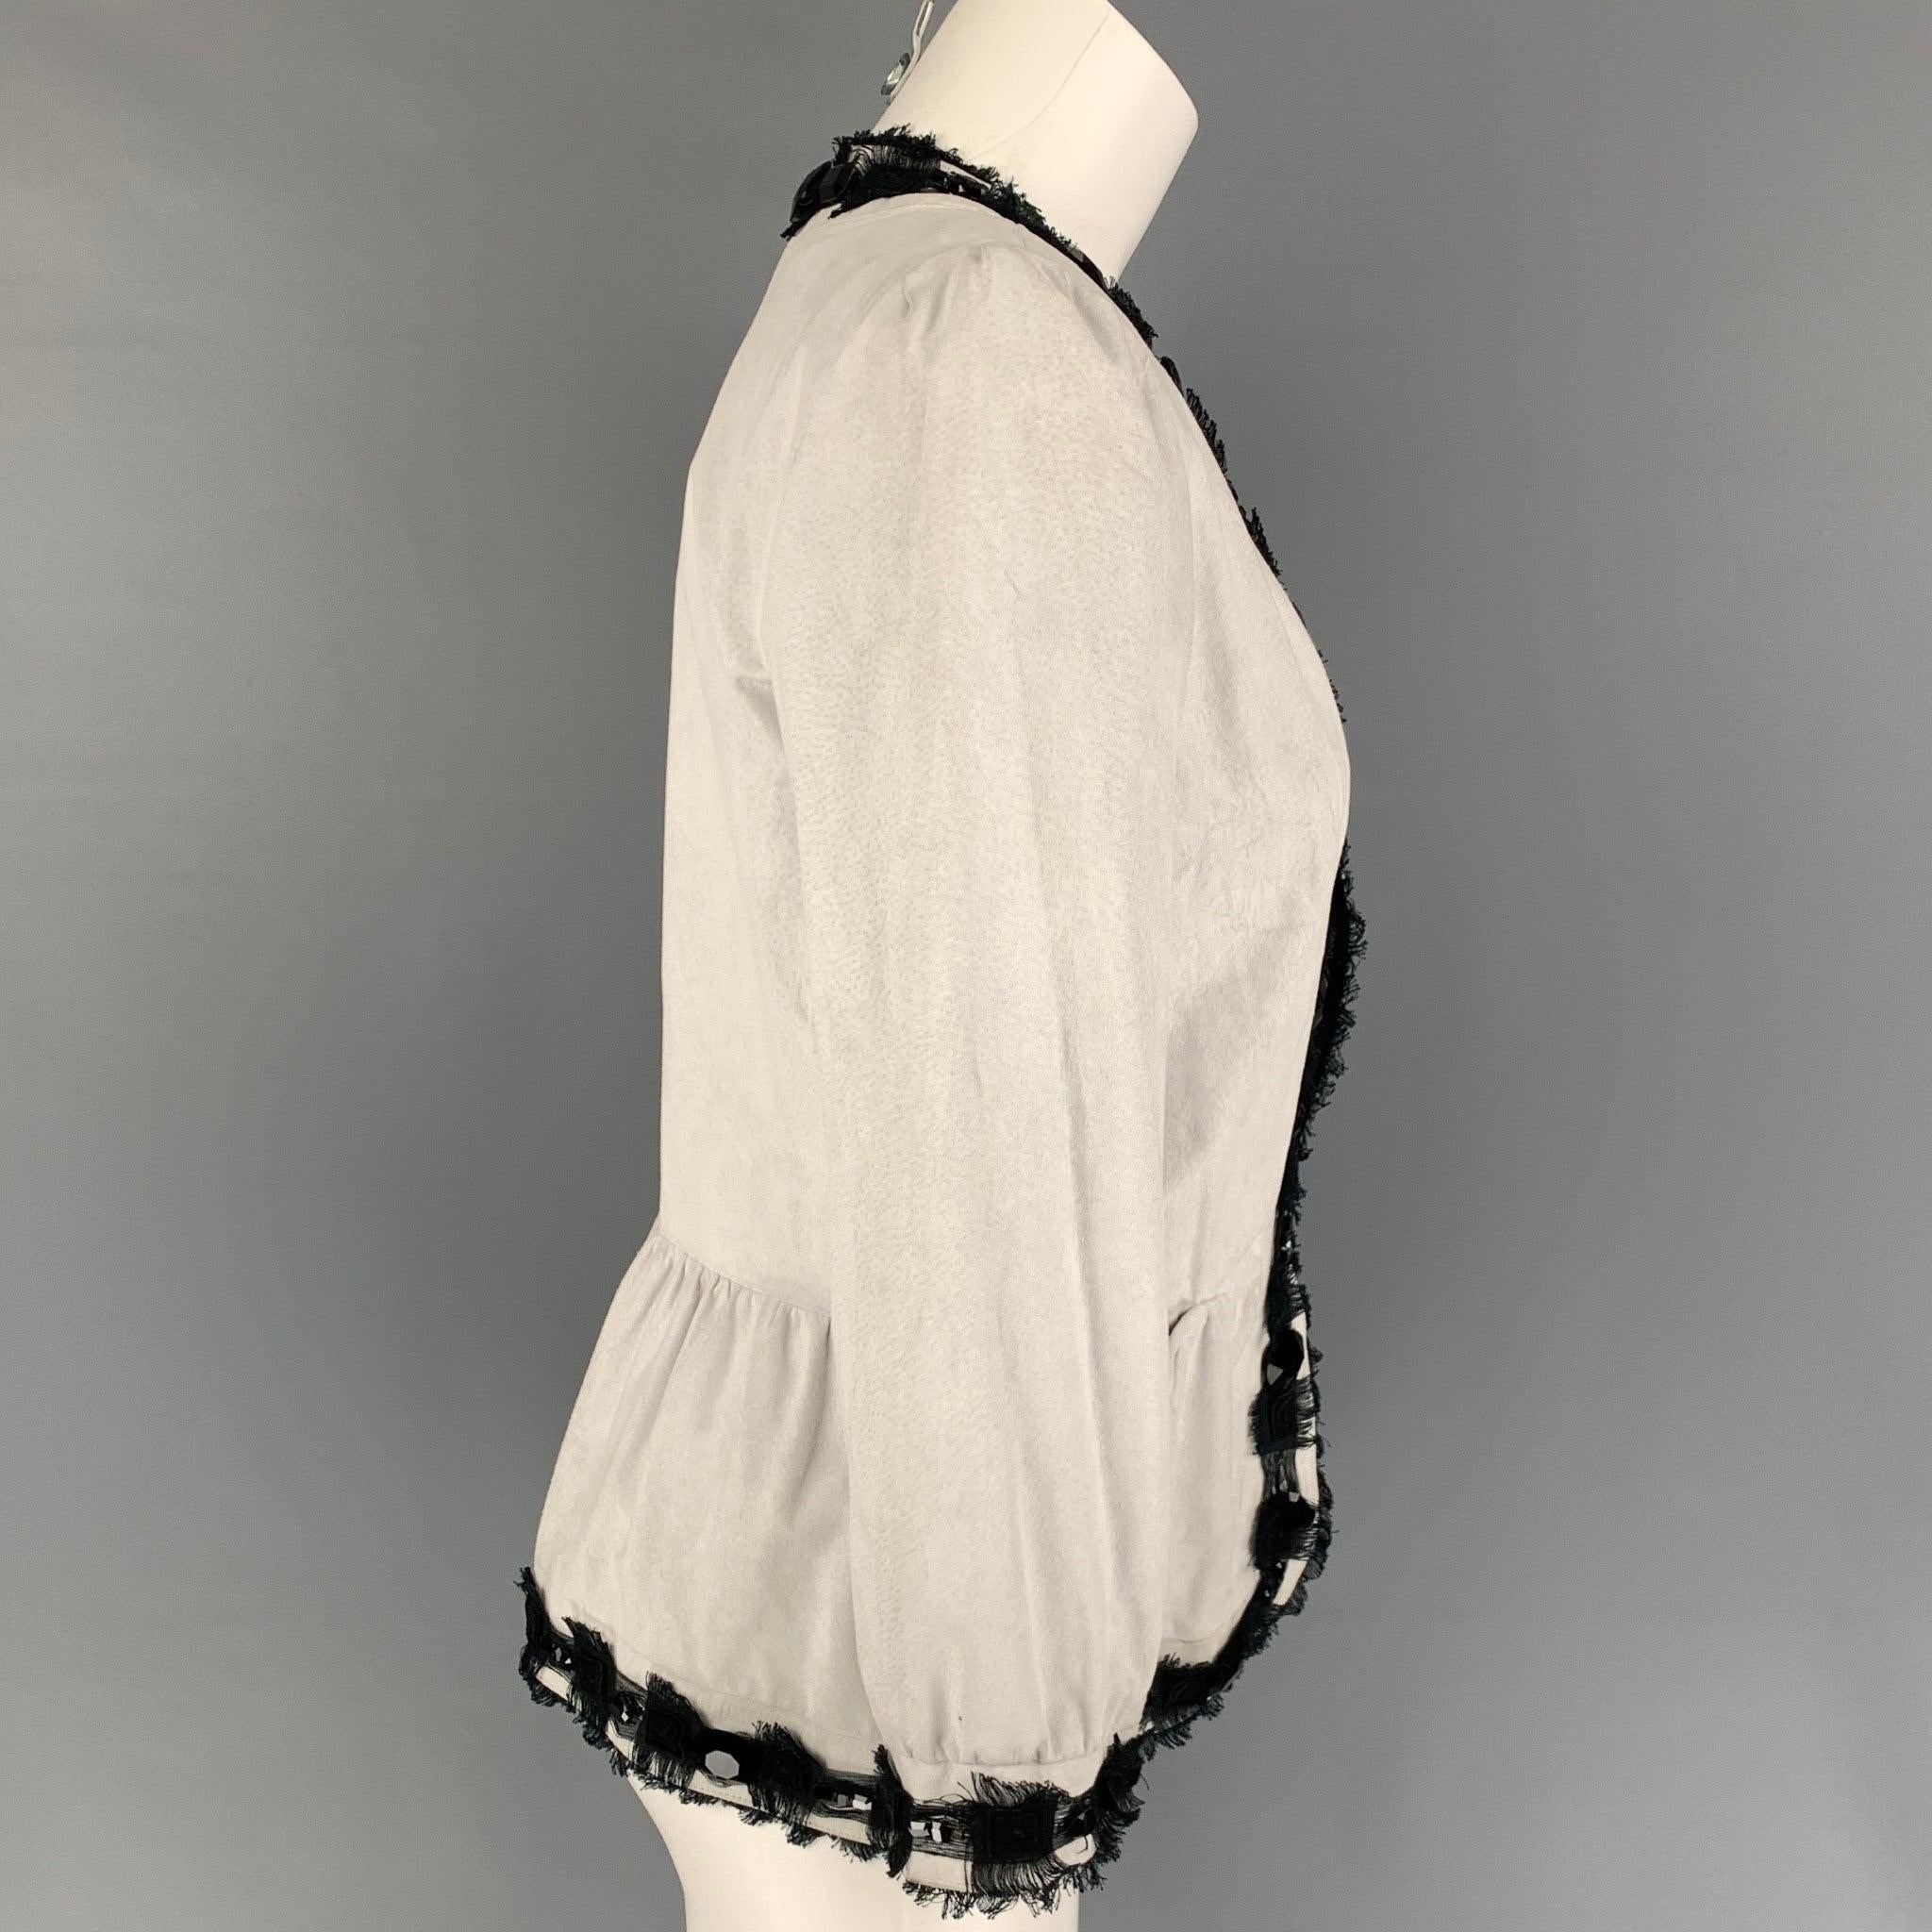 YVES SAINT LAURENT jacket comes in a off white leather with a black linen trim featuring large crystal embellishments, front pockets, and a hook & loop closure. Made in Italy.
Very Good
Pre-Owned Condition. 

Marked:   38 

Measurements: 
